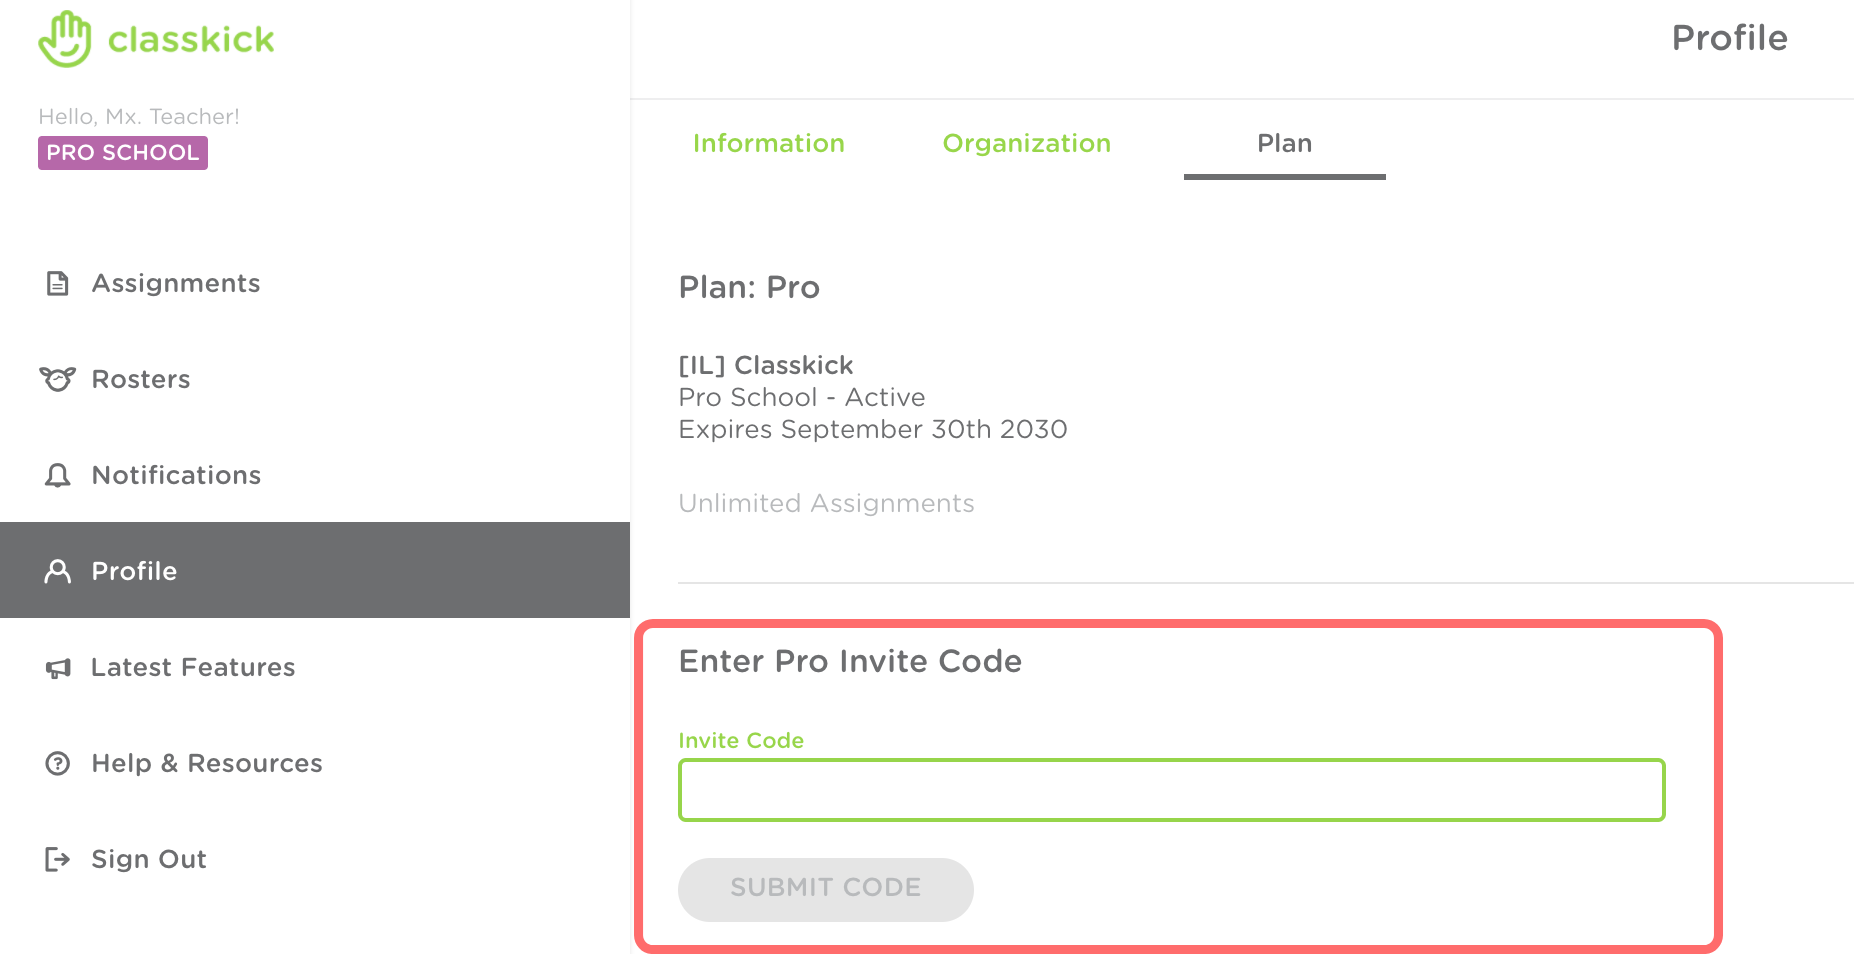 The Enter Pro Invite Code box is outlined in red under the Profile and Plan tab.